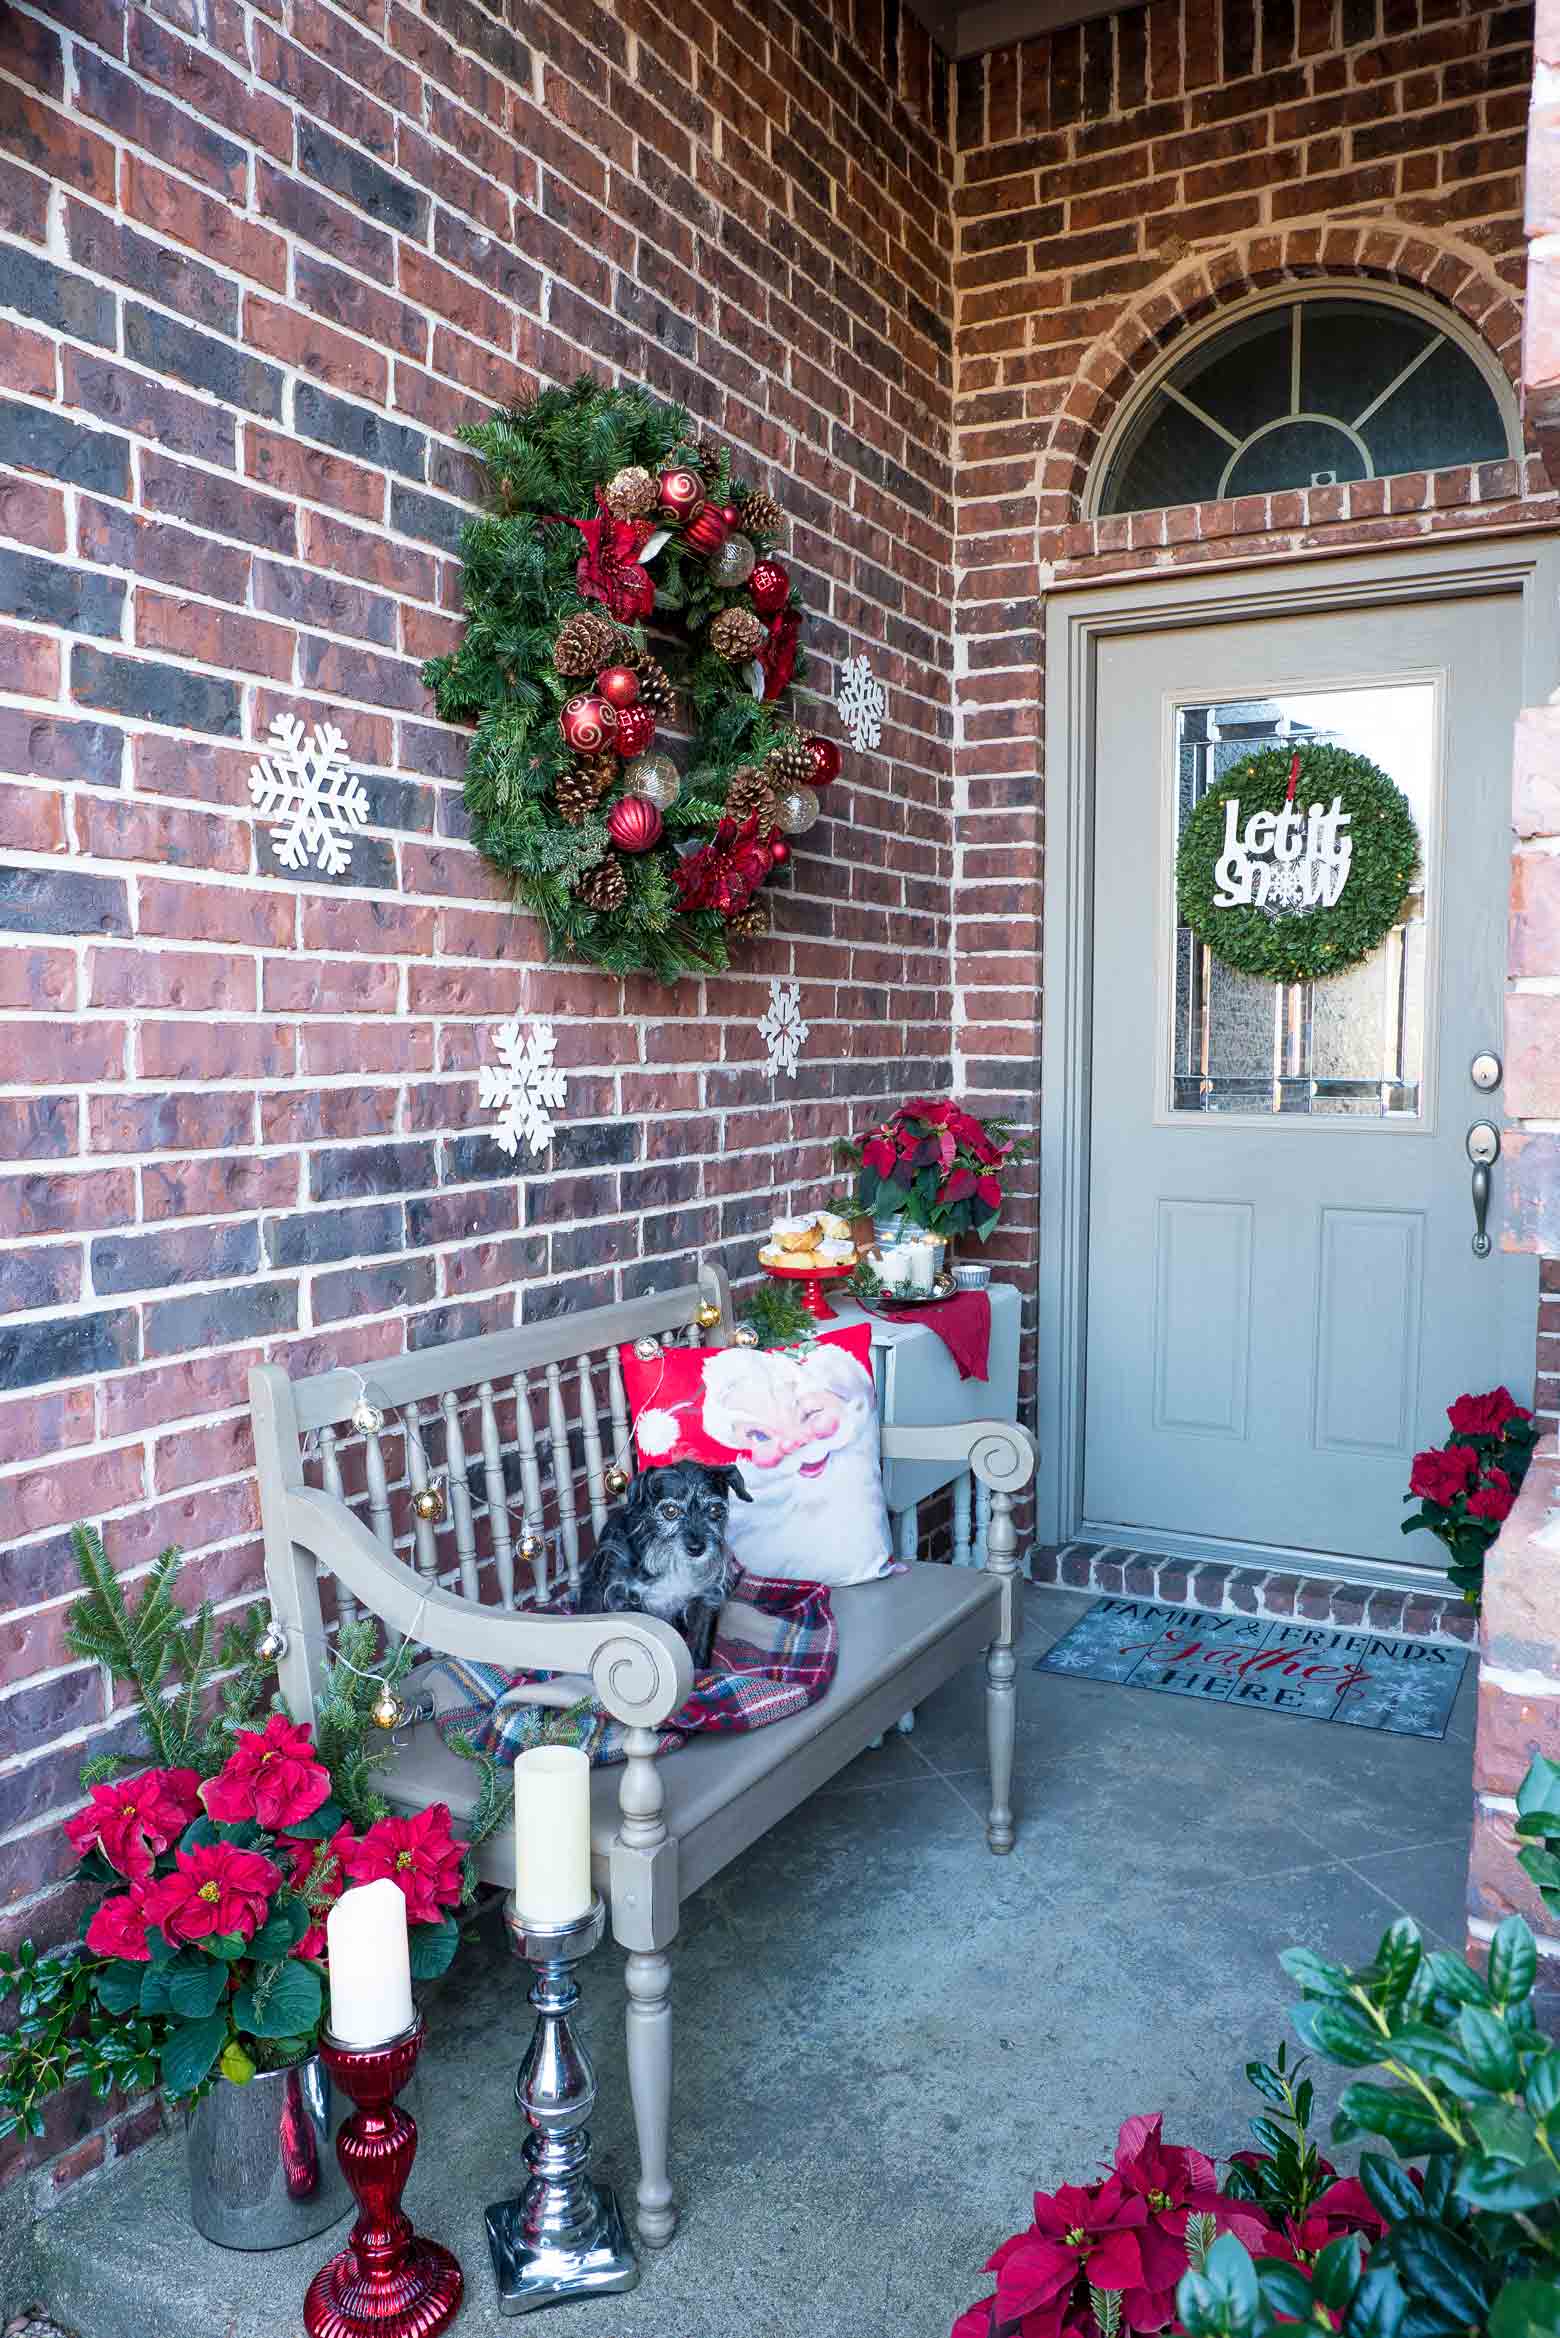 Christmas front porch tour— see all the tips and tricks to use these classic holiday ideas in your own decor. Simple ideas like easy to find evergreen wreaths, poinsettias, candlesticks and both boxwood and evergreen wreaths. Be sure to greet your guests to a drink, like this boozy hot white chocolate! via @mrsmajorhoff